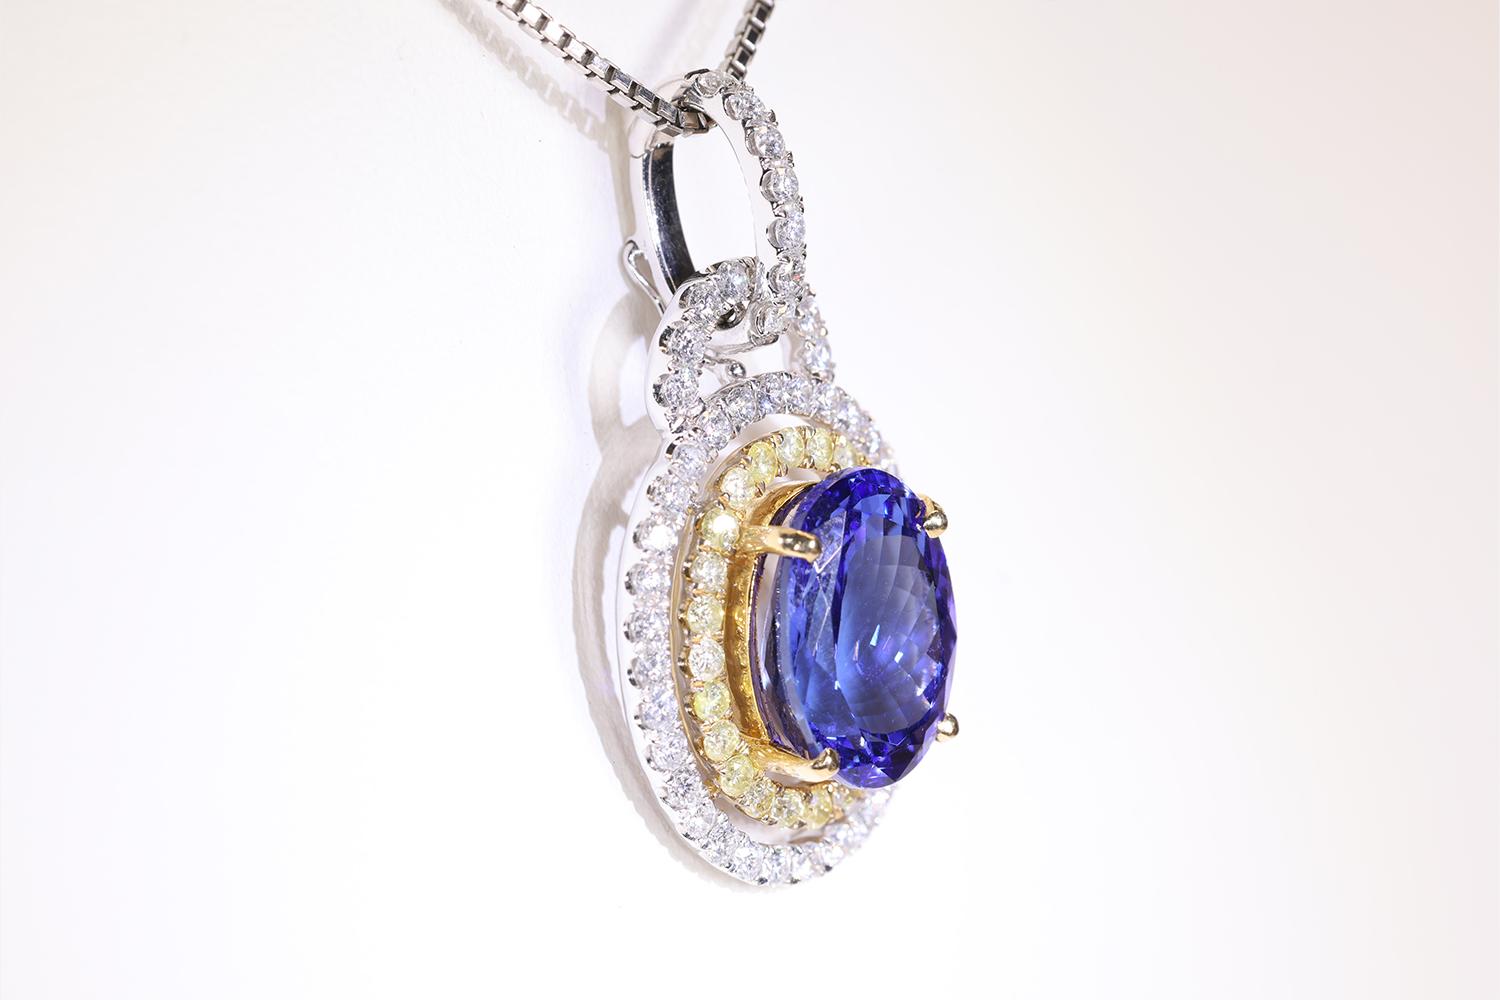 Oval Cut 7 Carat Tanzanite Pendant with White & Yellow Diamonds Set in 2 Tone 18K Gold For Sale